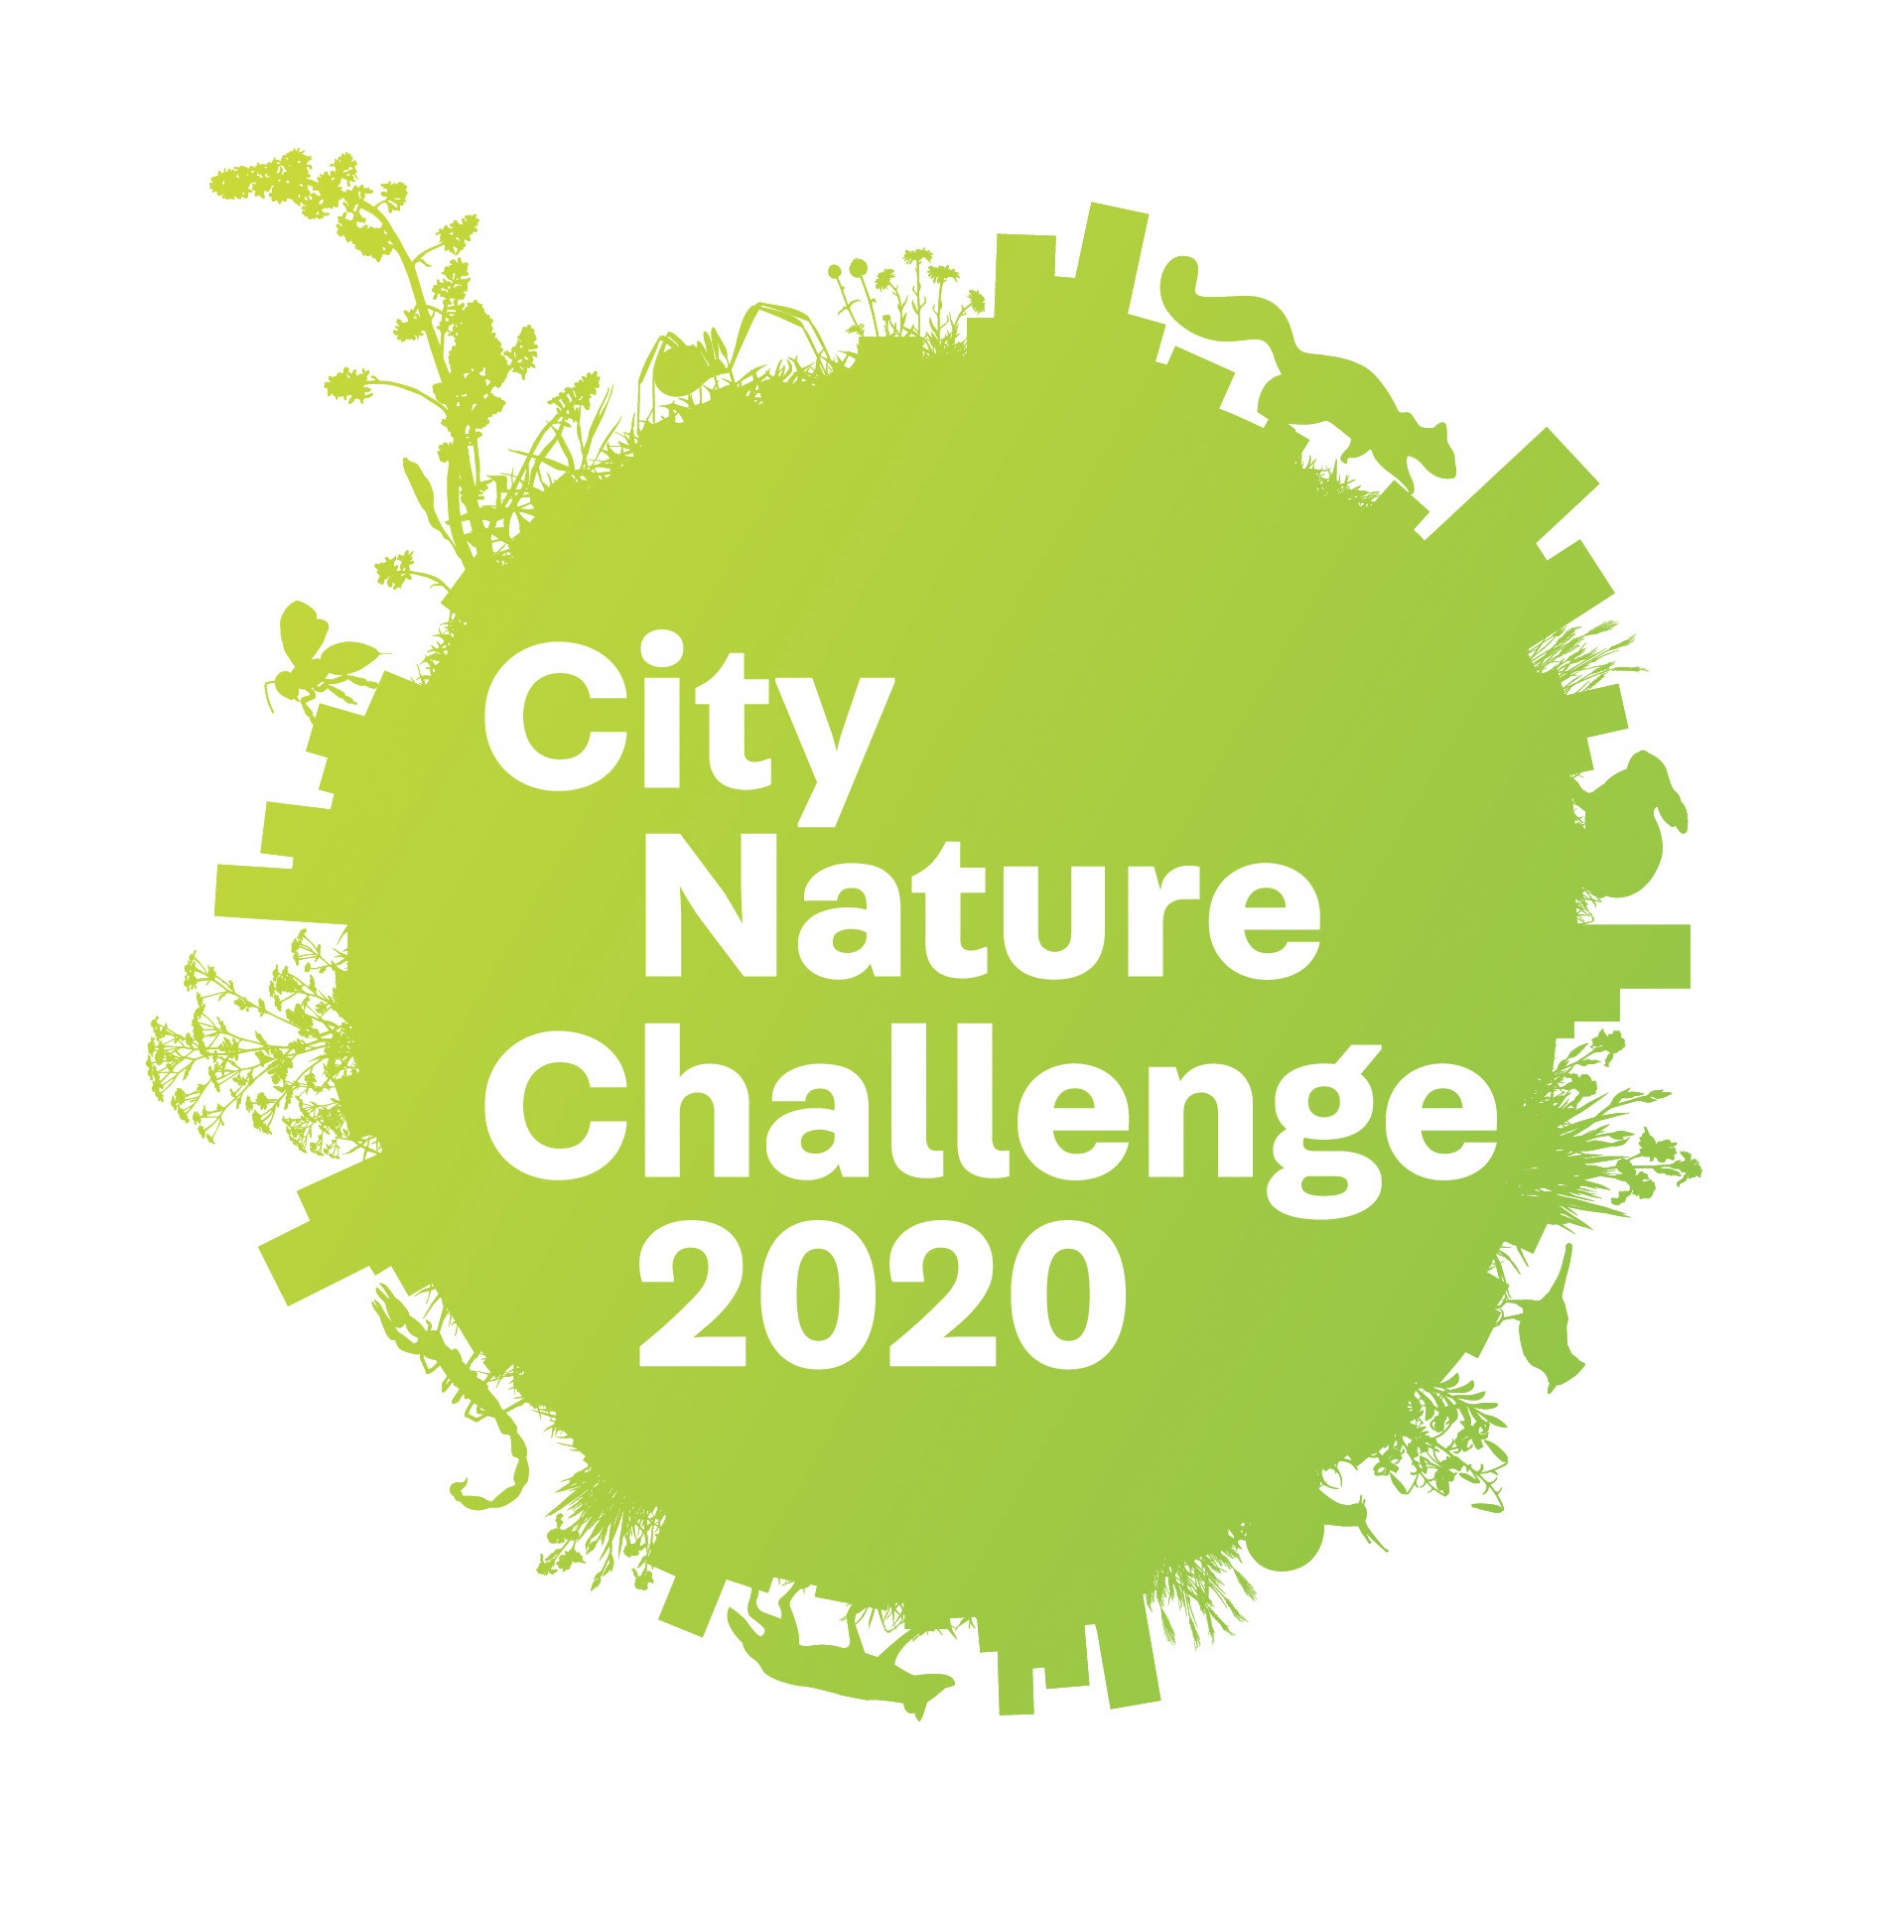 IE to participate for the first time in the City Nature Challenge